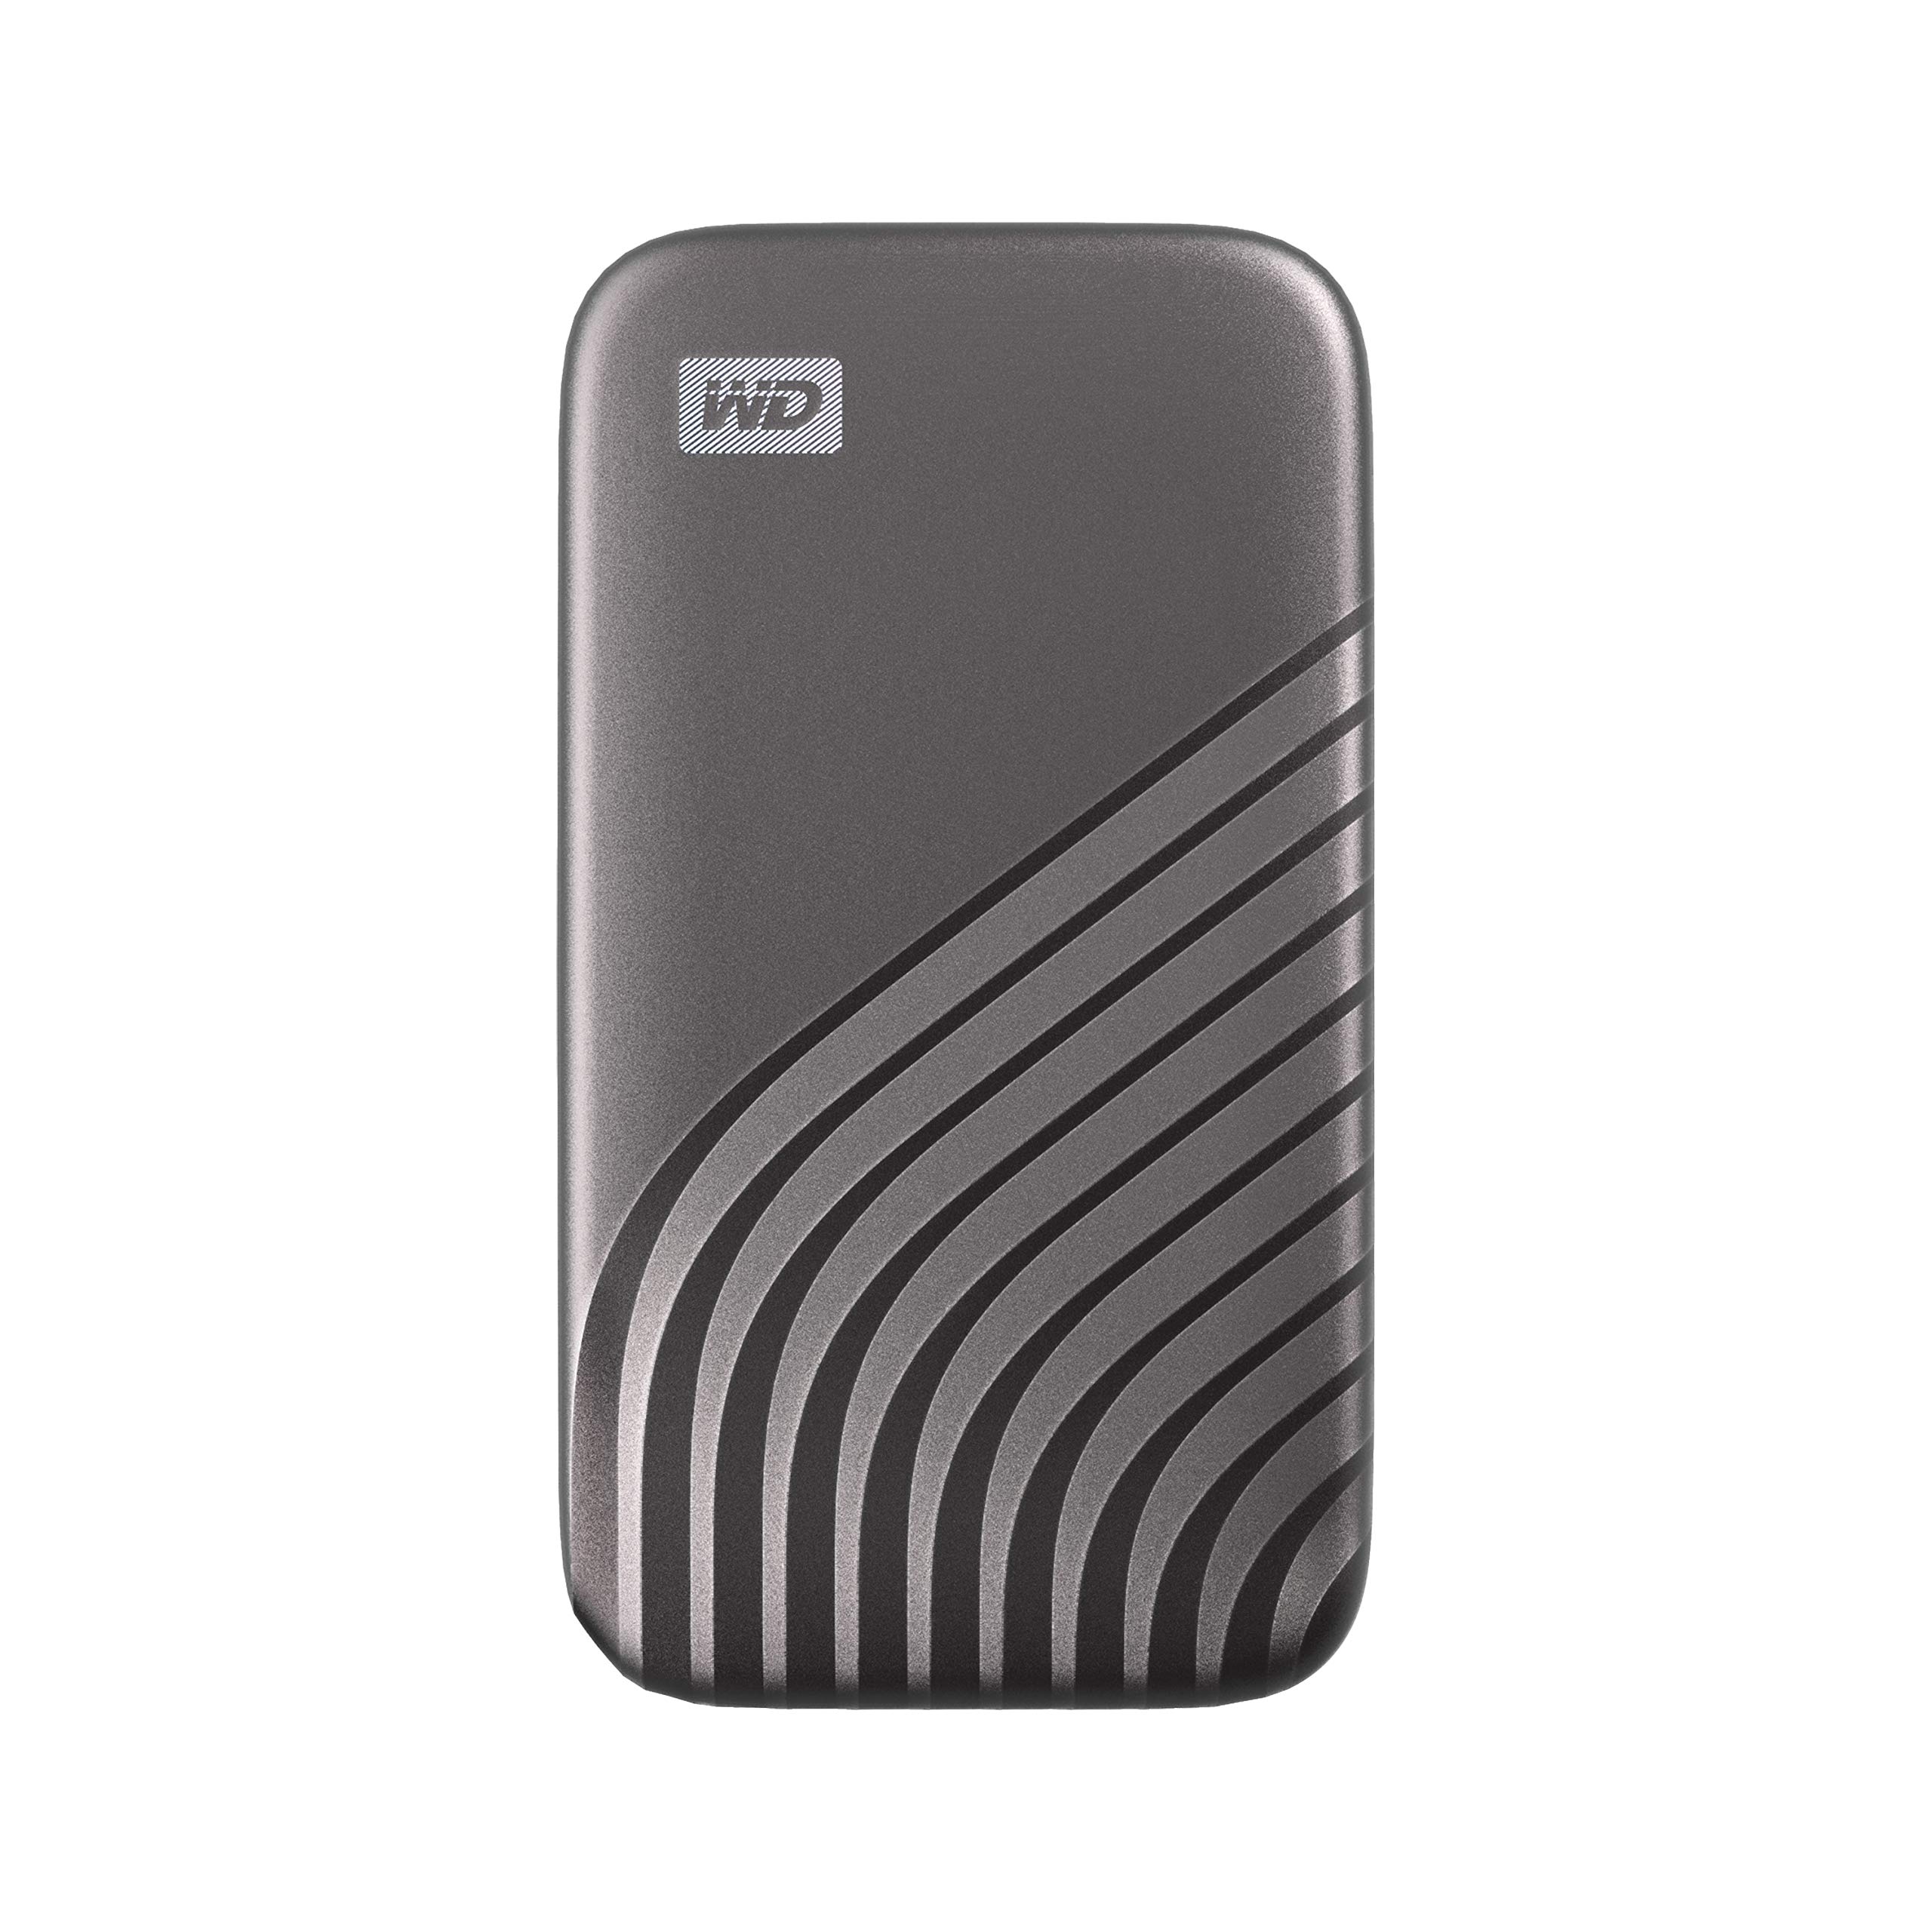 2TB WD My Passport Portable External SSD (Various Colors) $115 + Free Shipping